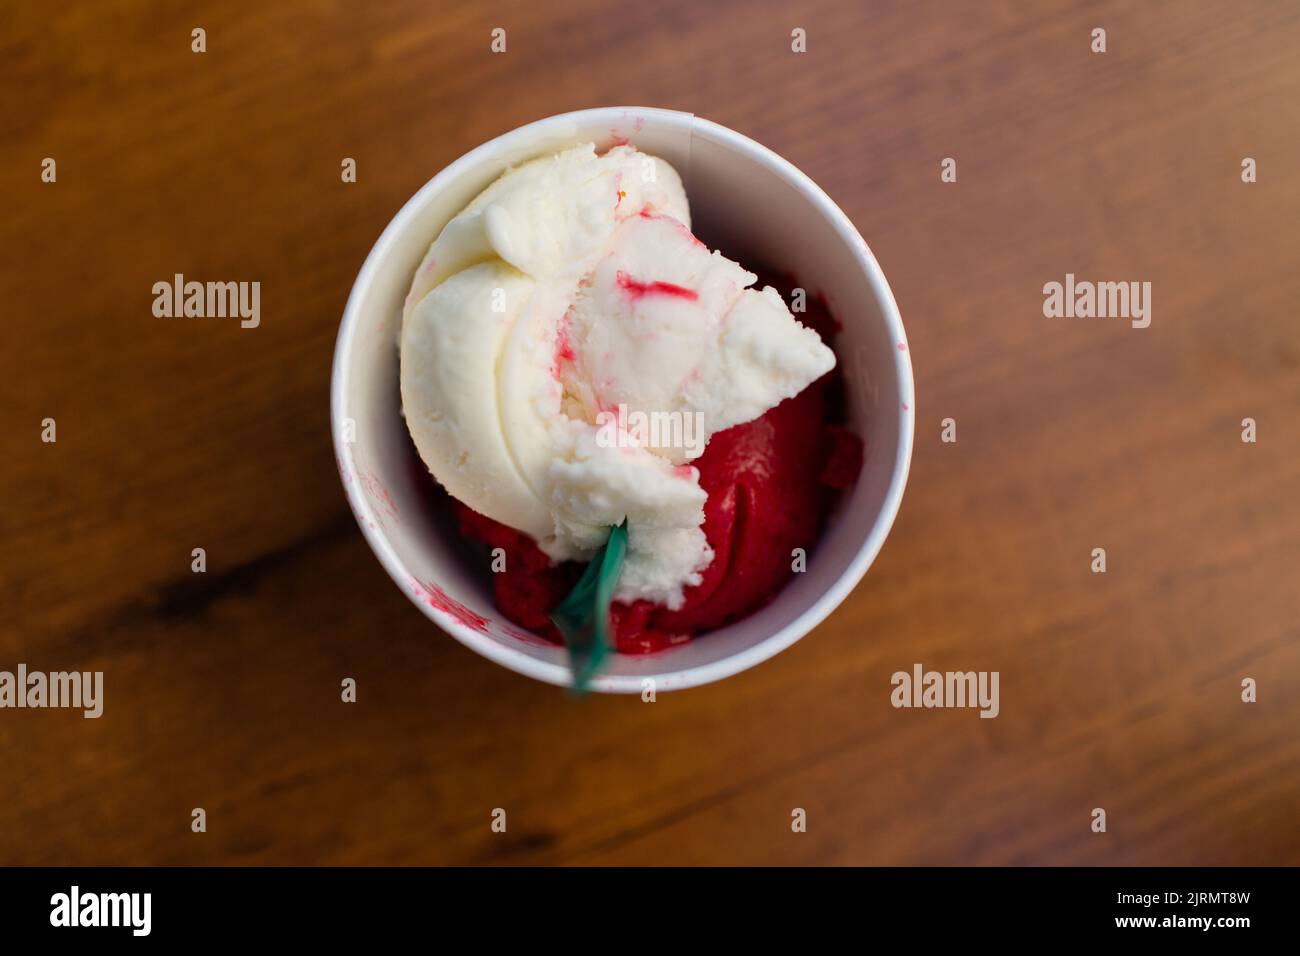 Dondurma colorful ice cream in a cup on table top view. Stock Photo